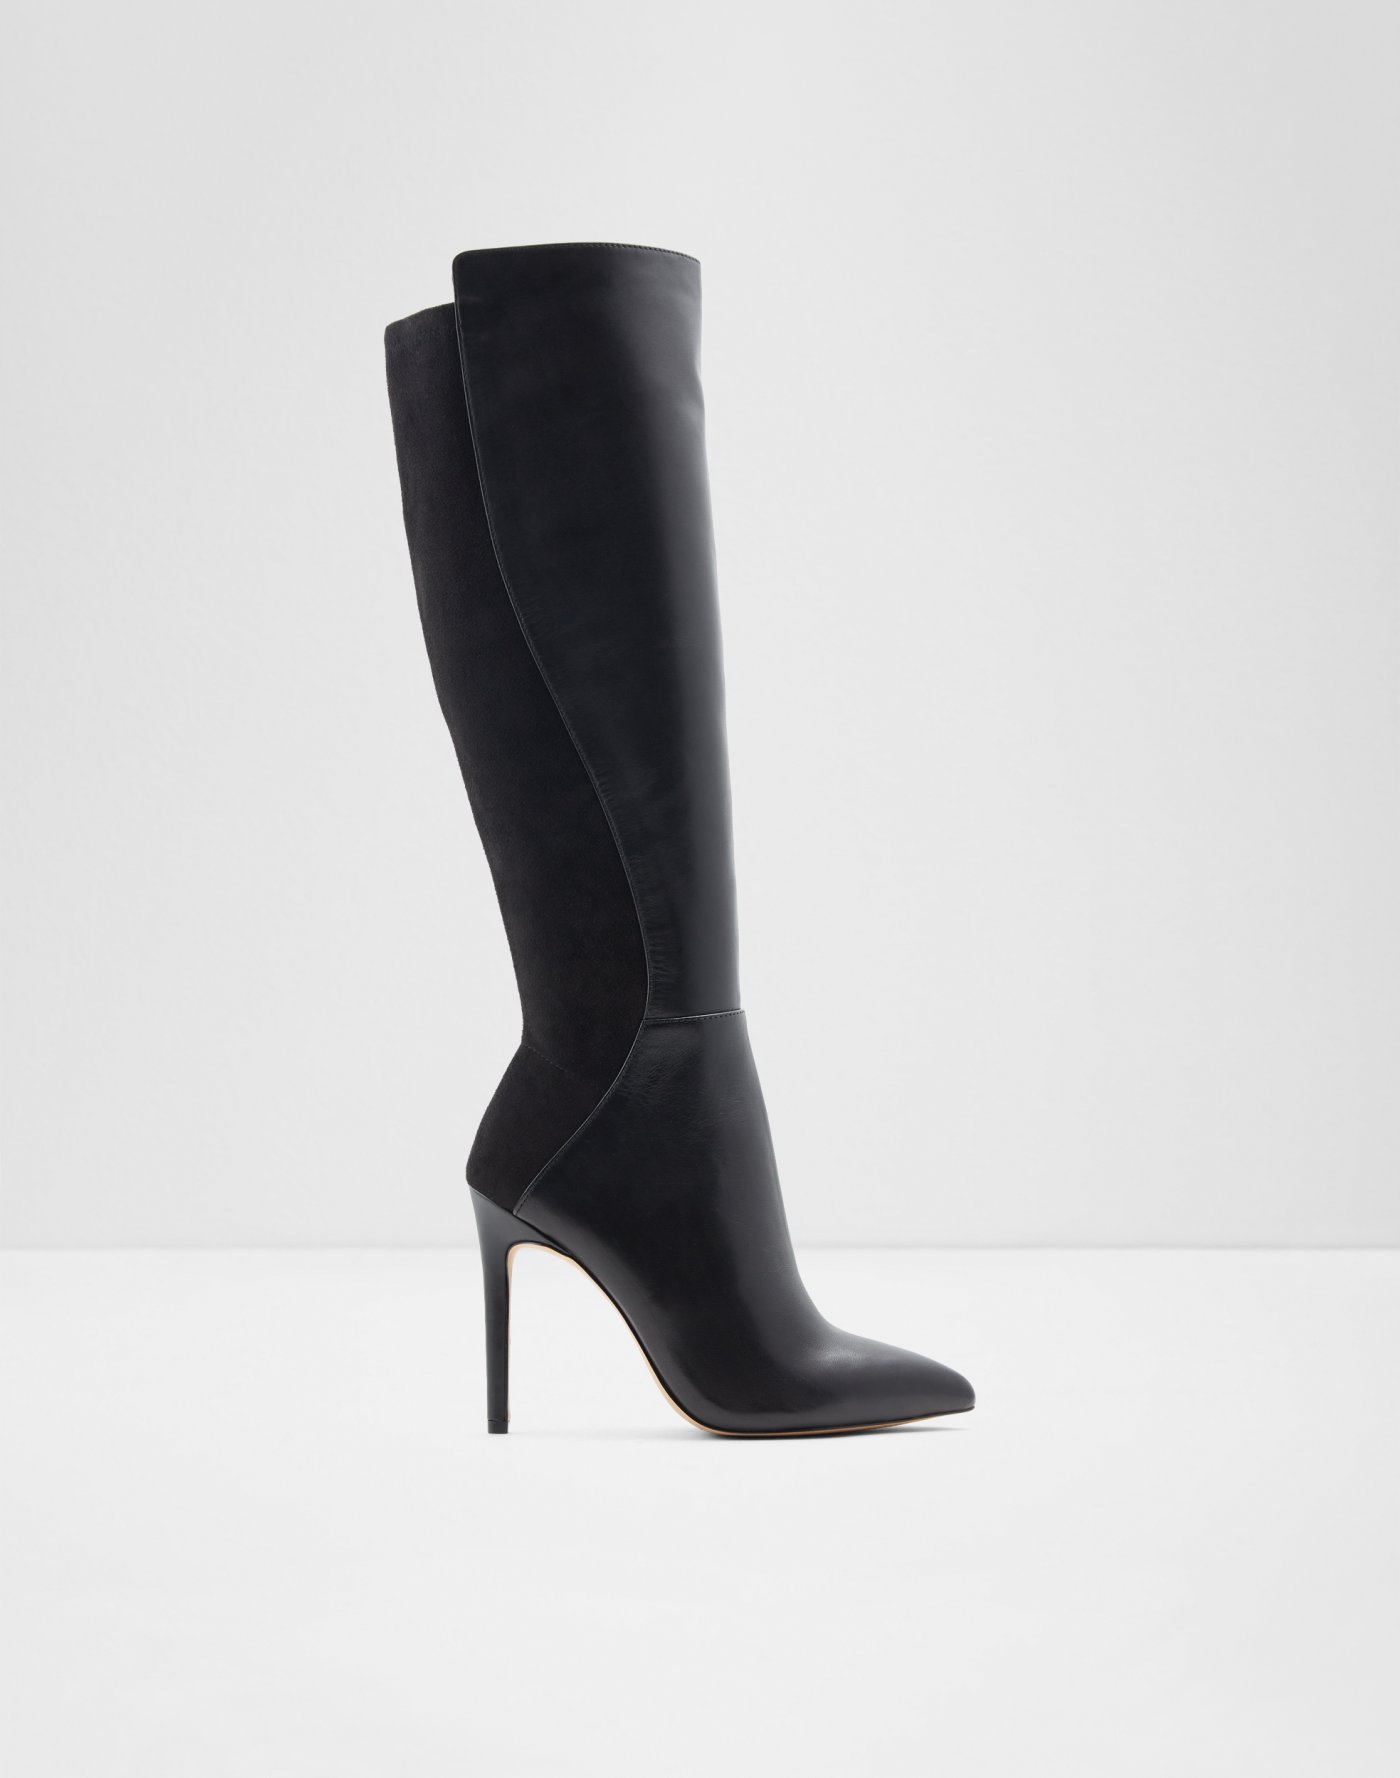 suede knee high boots canada